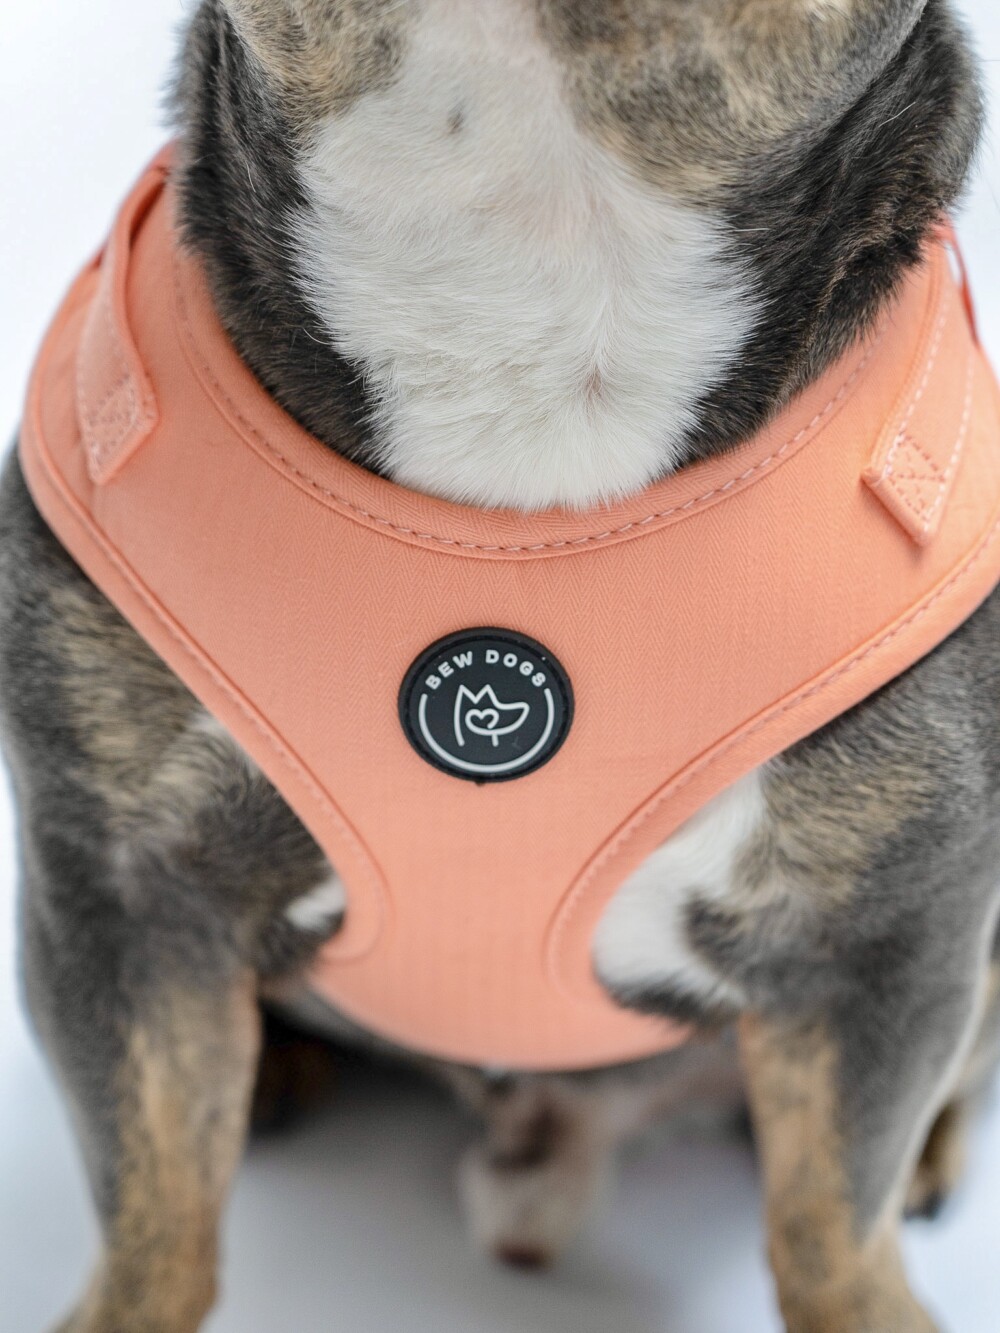 a close up or a bright peach harness on a grey and white dog, with a black branding logo.